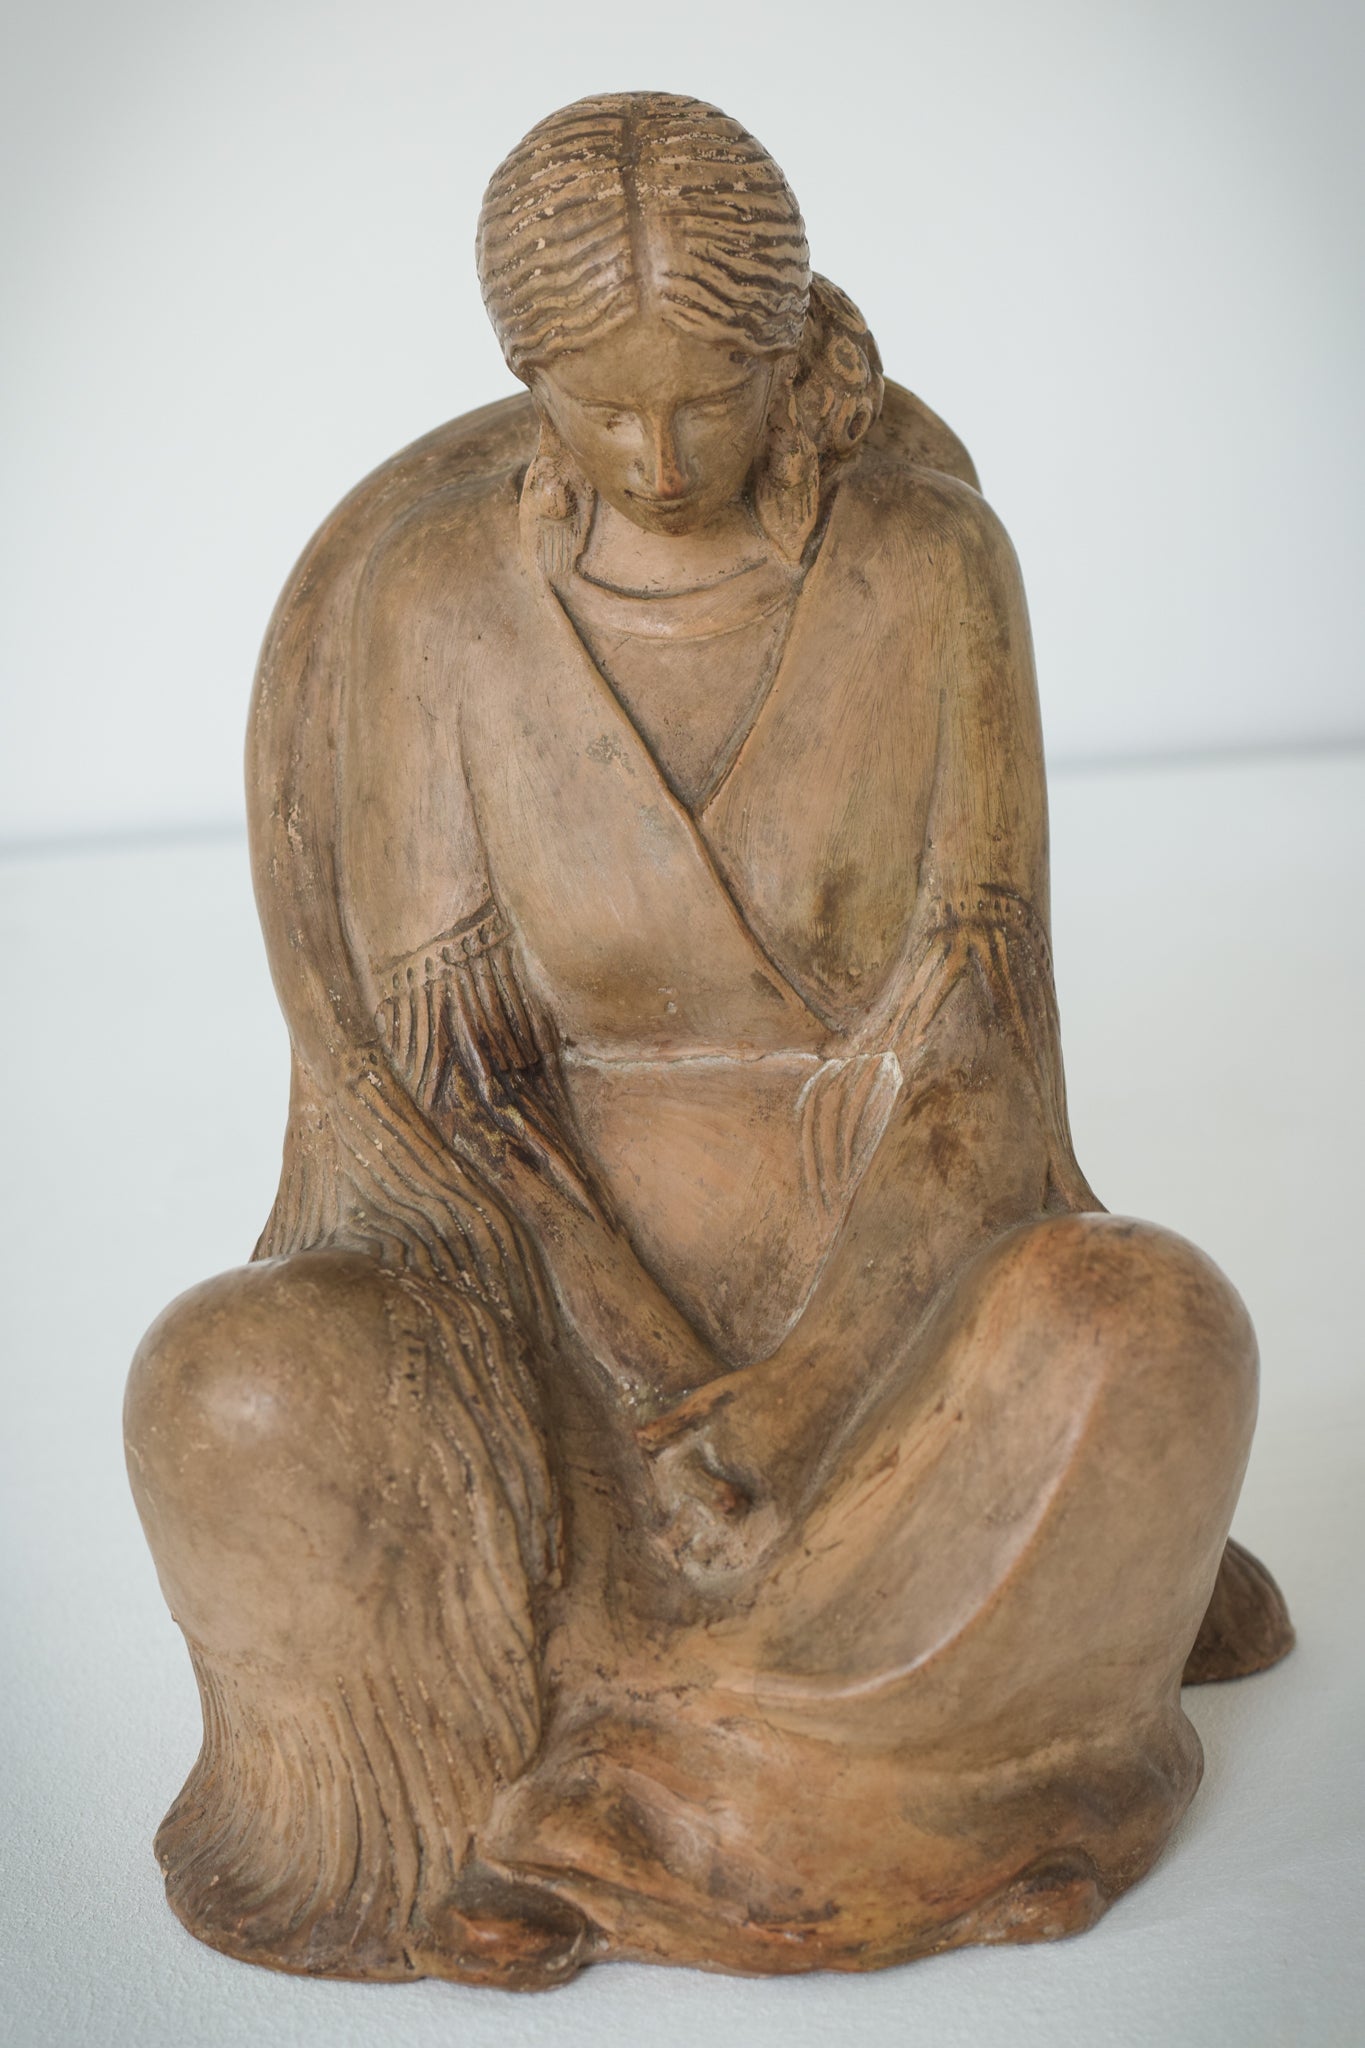 Terracotta Sculpture of A Draped Seated Woman